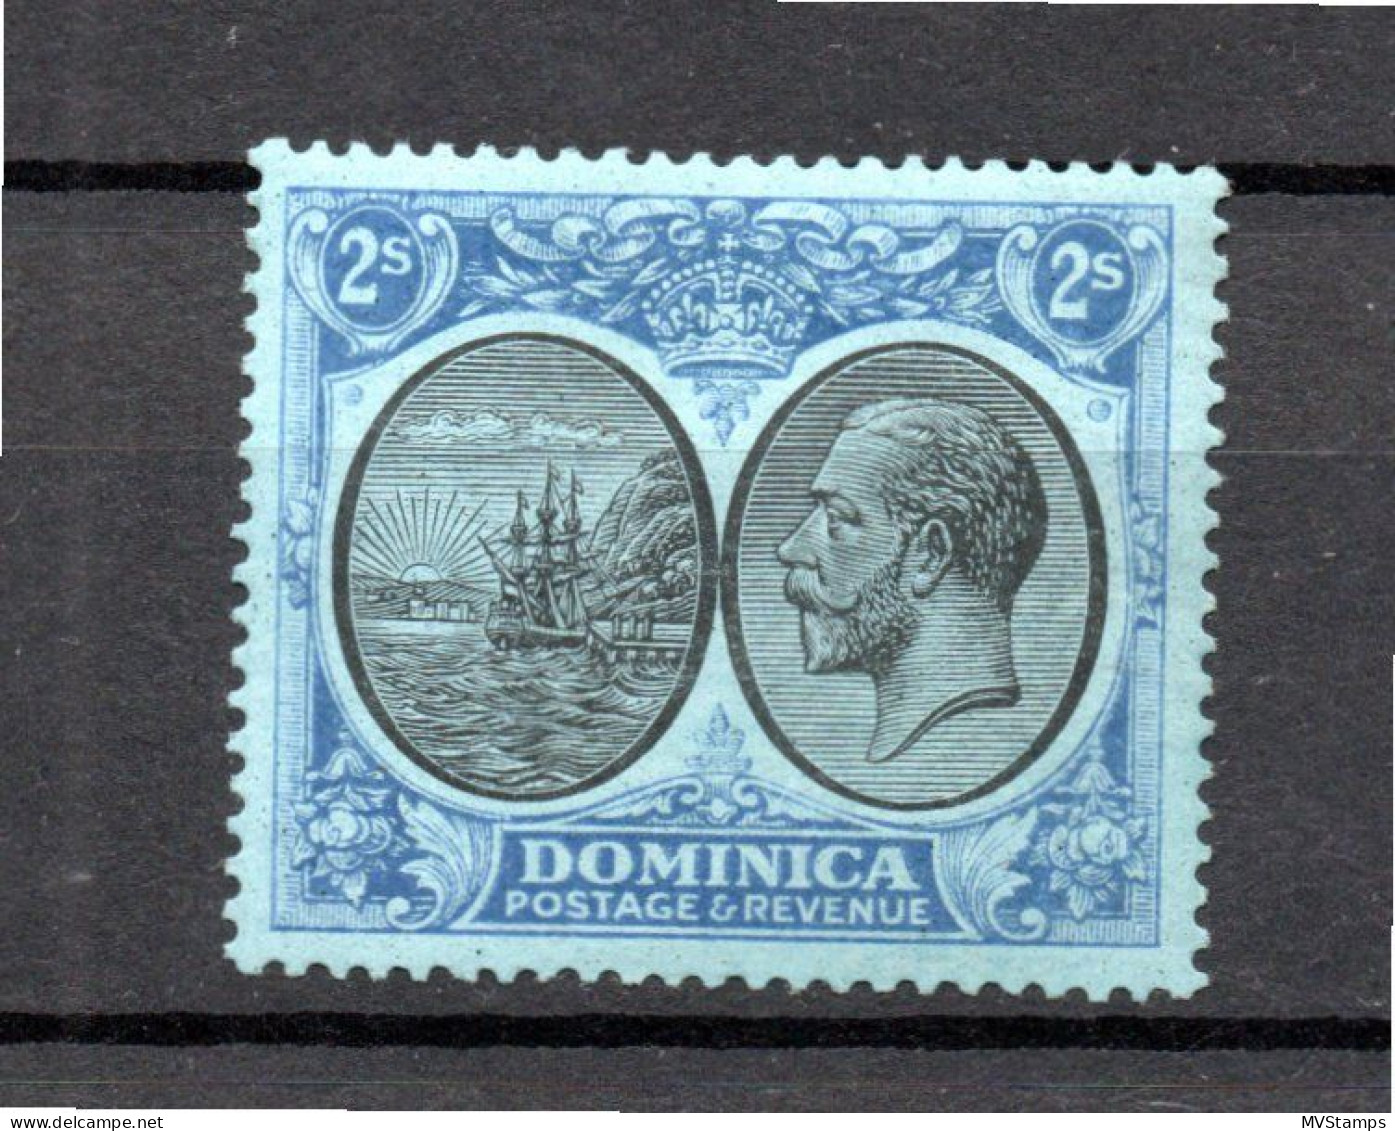 Dominica 1923 Old 2 Shilling King George V Stamp (Michel 81) Nice MNH - Dominica (...-1978)